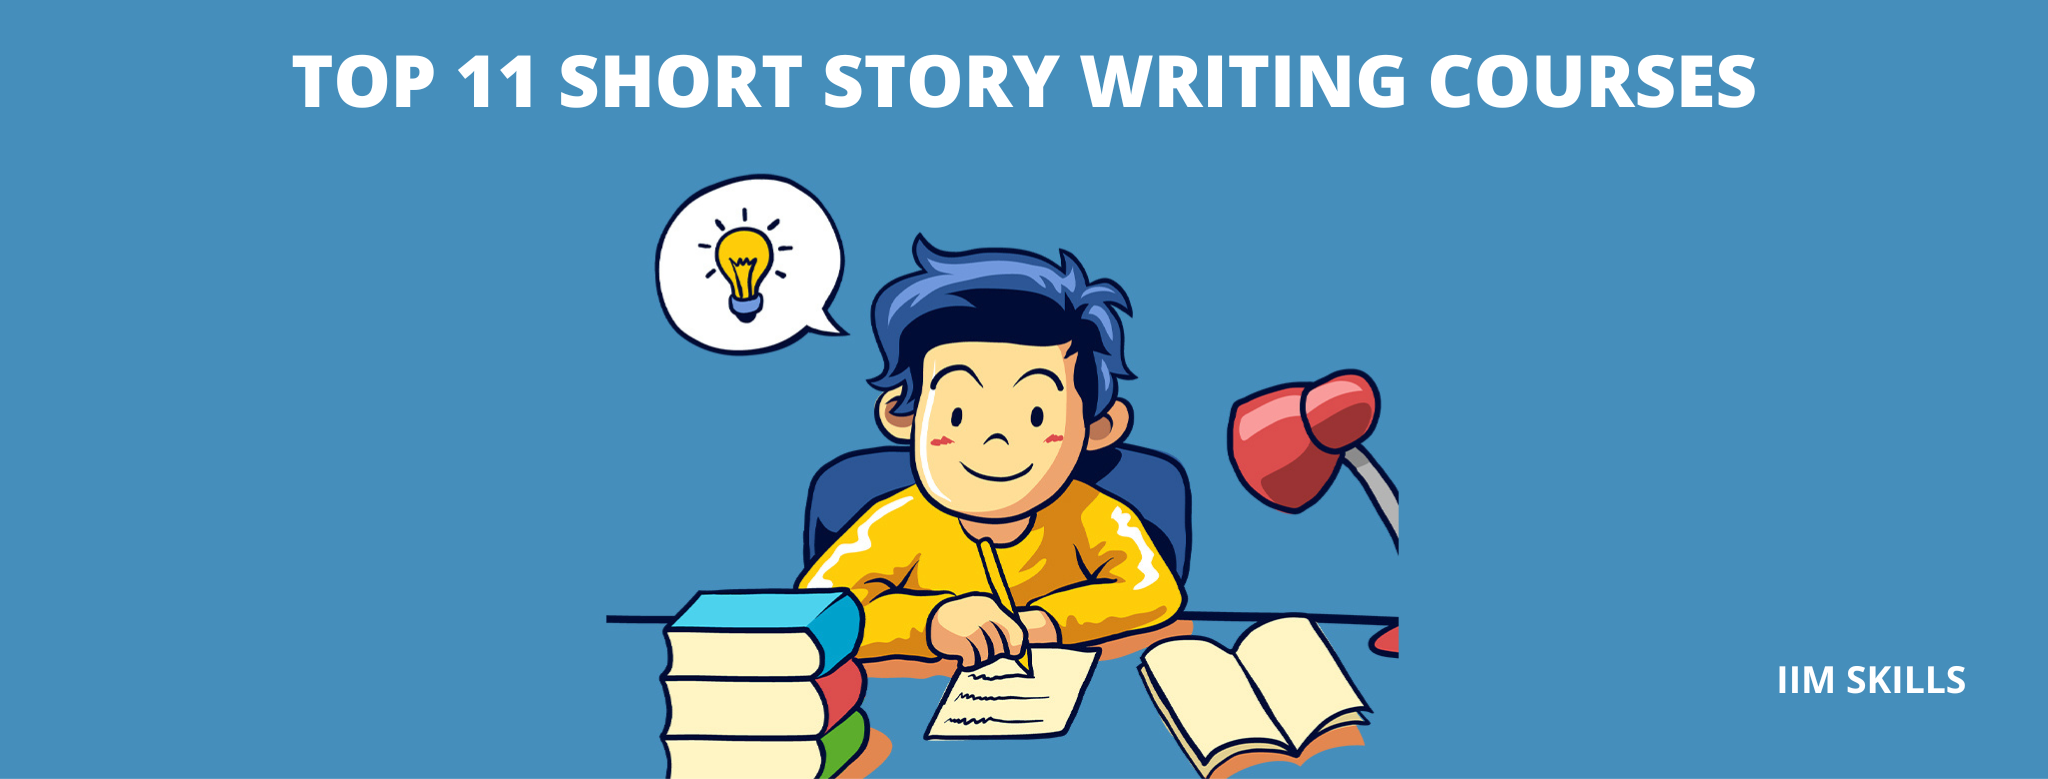 Top 11 Excellent Short Story Writing Courses - IIM SKILLS